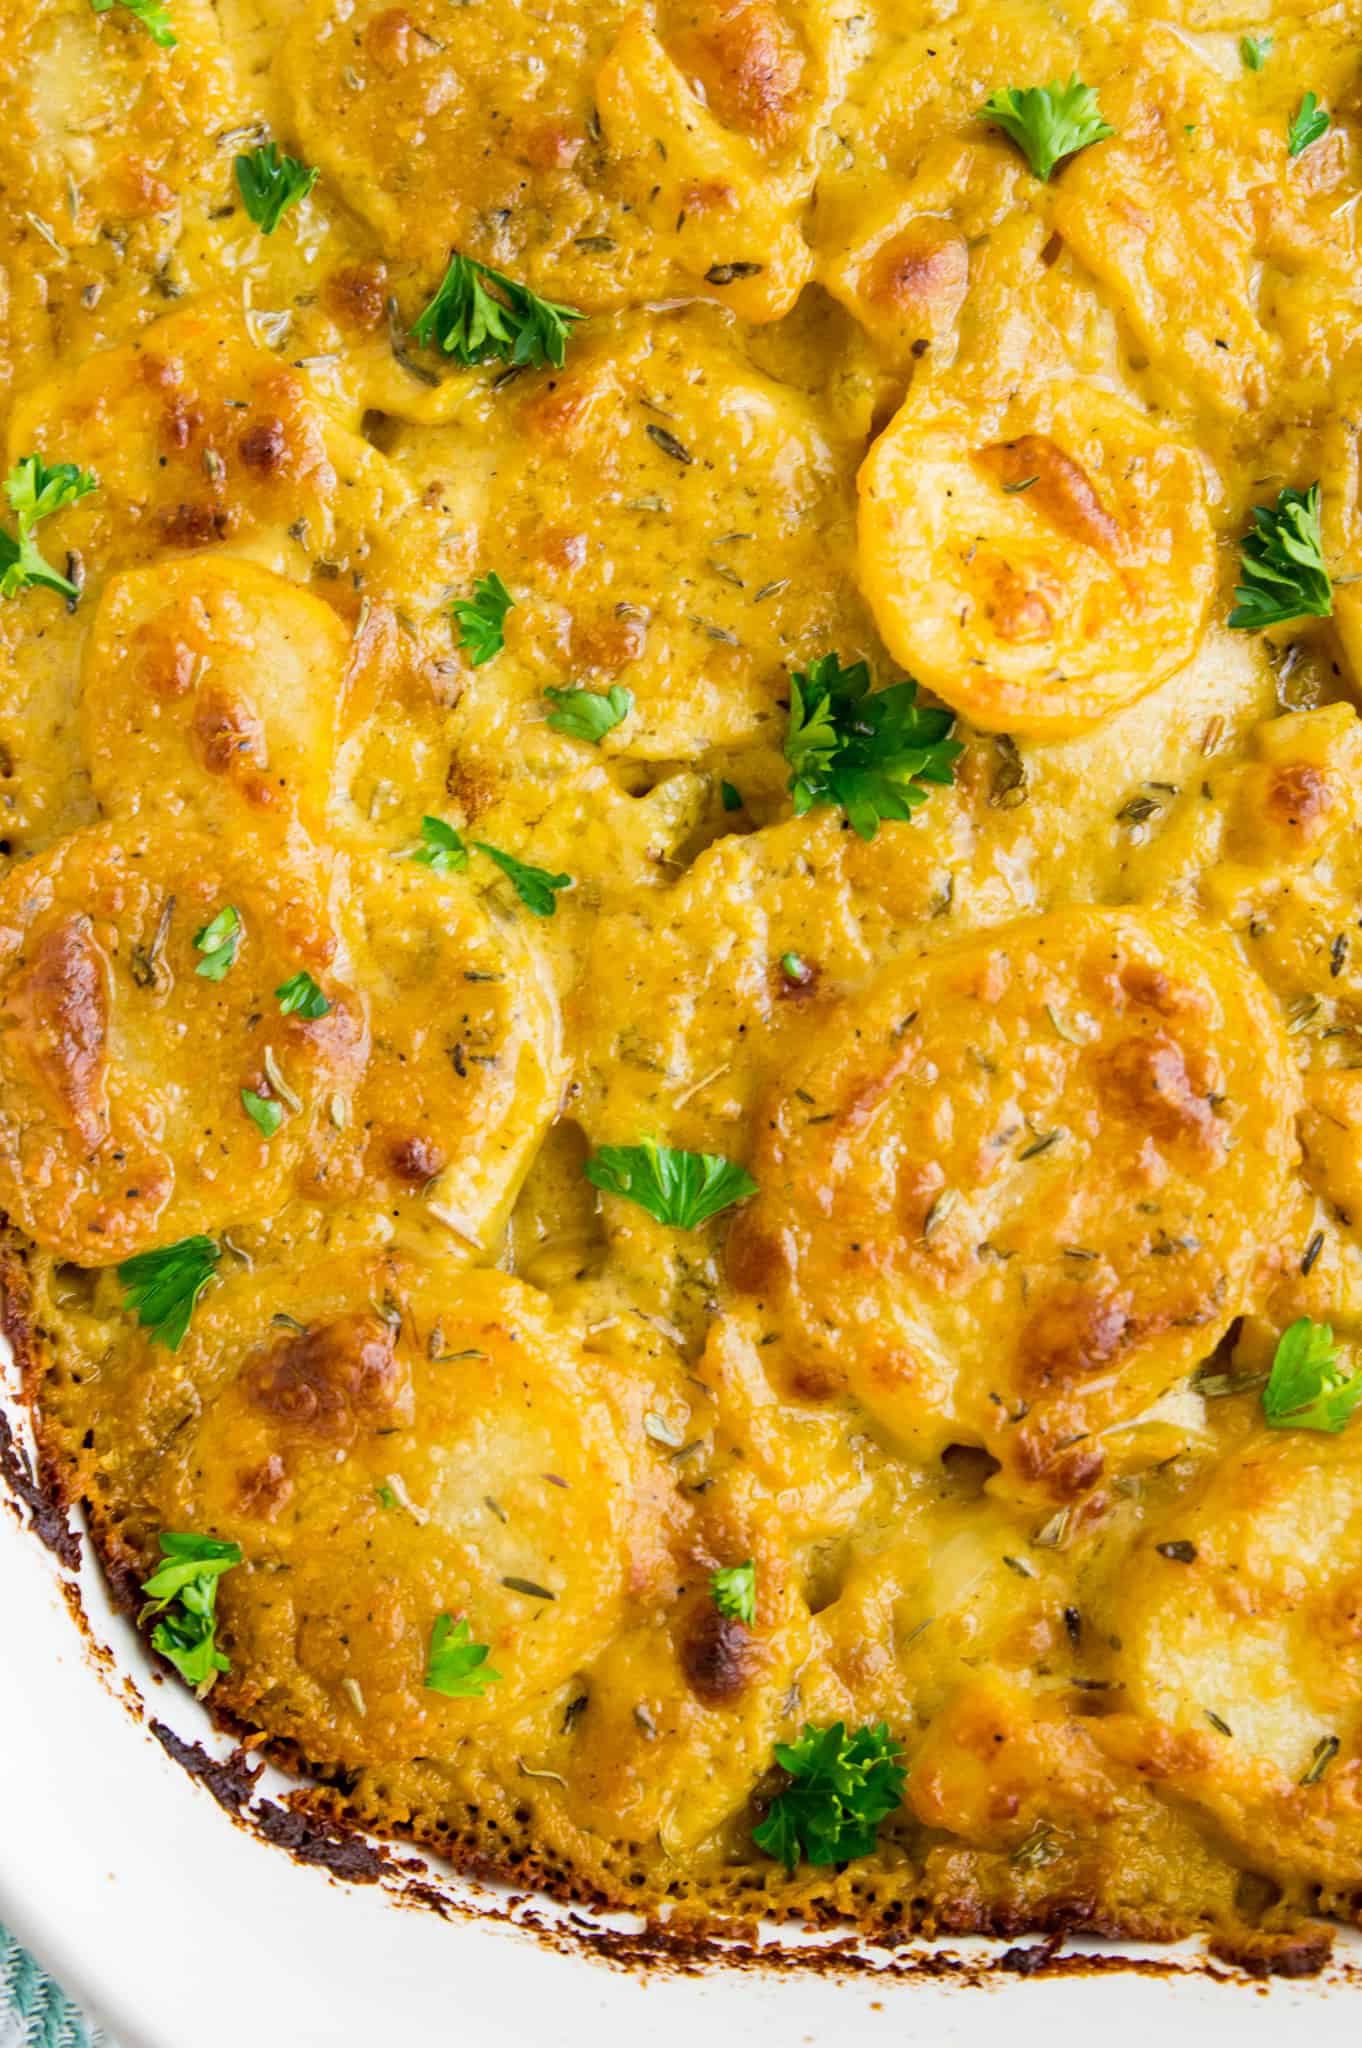 A pan of Whole30 scalloped potatoes garnished with parsley.